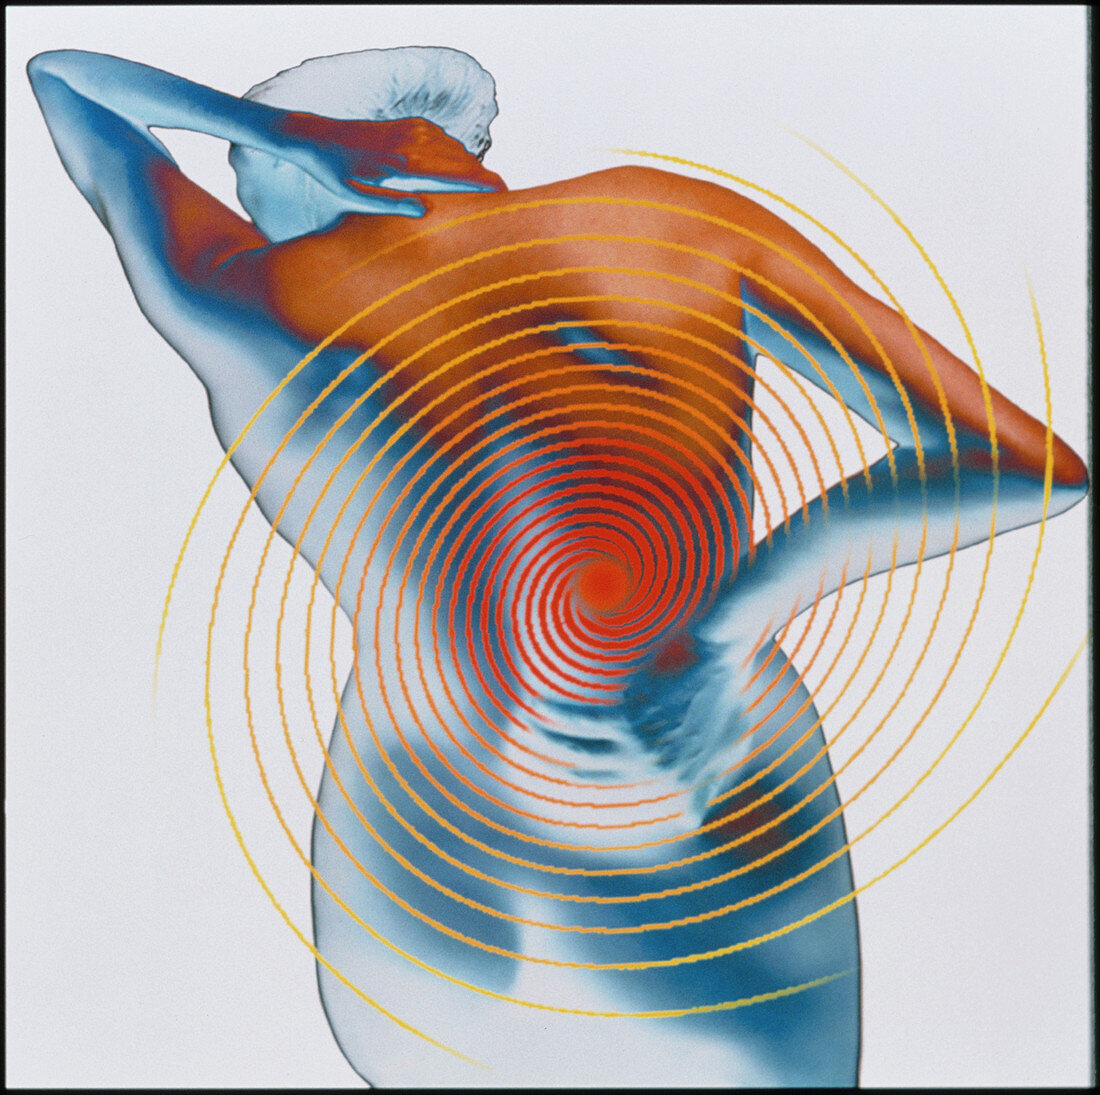 Abstract artwork depicting lower back pain